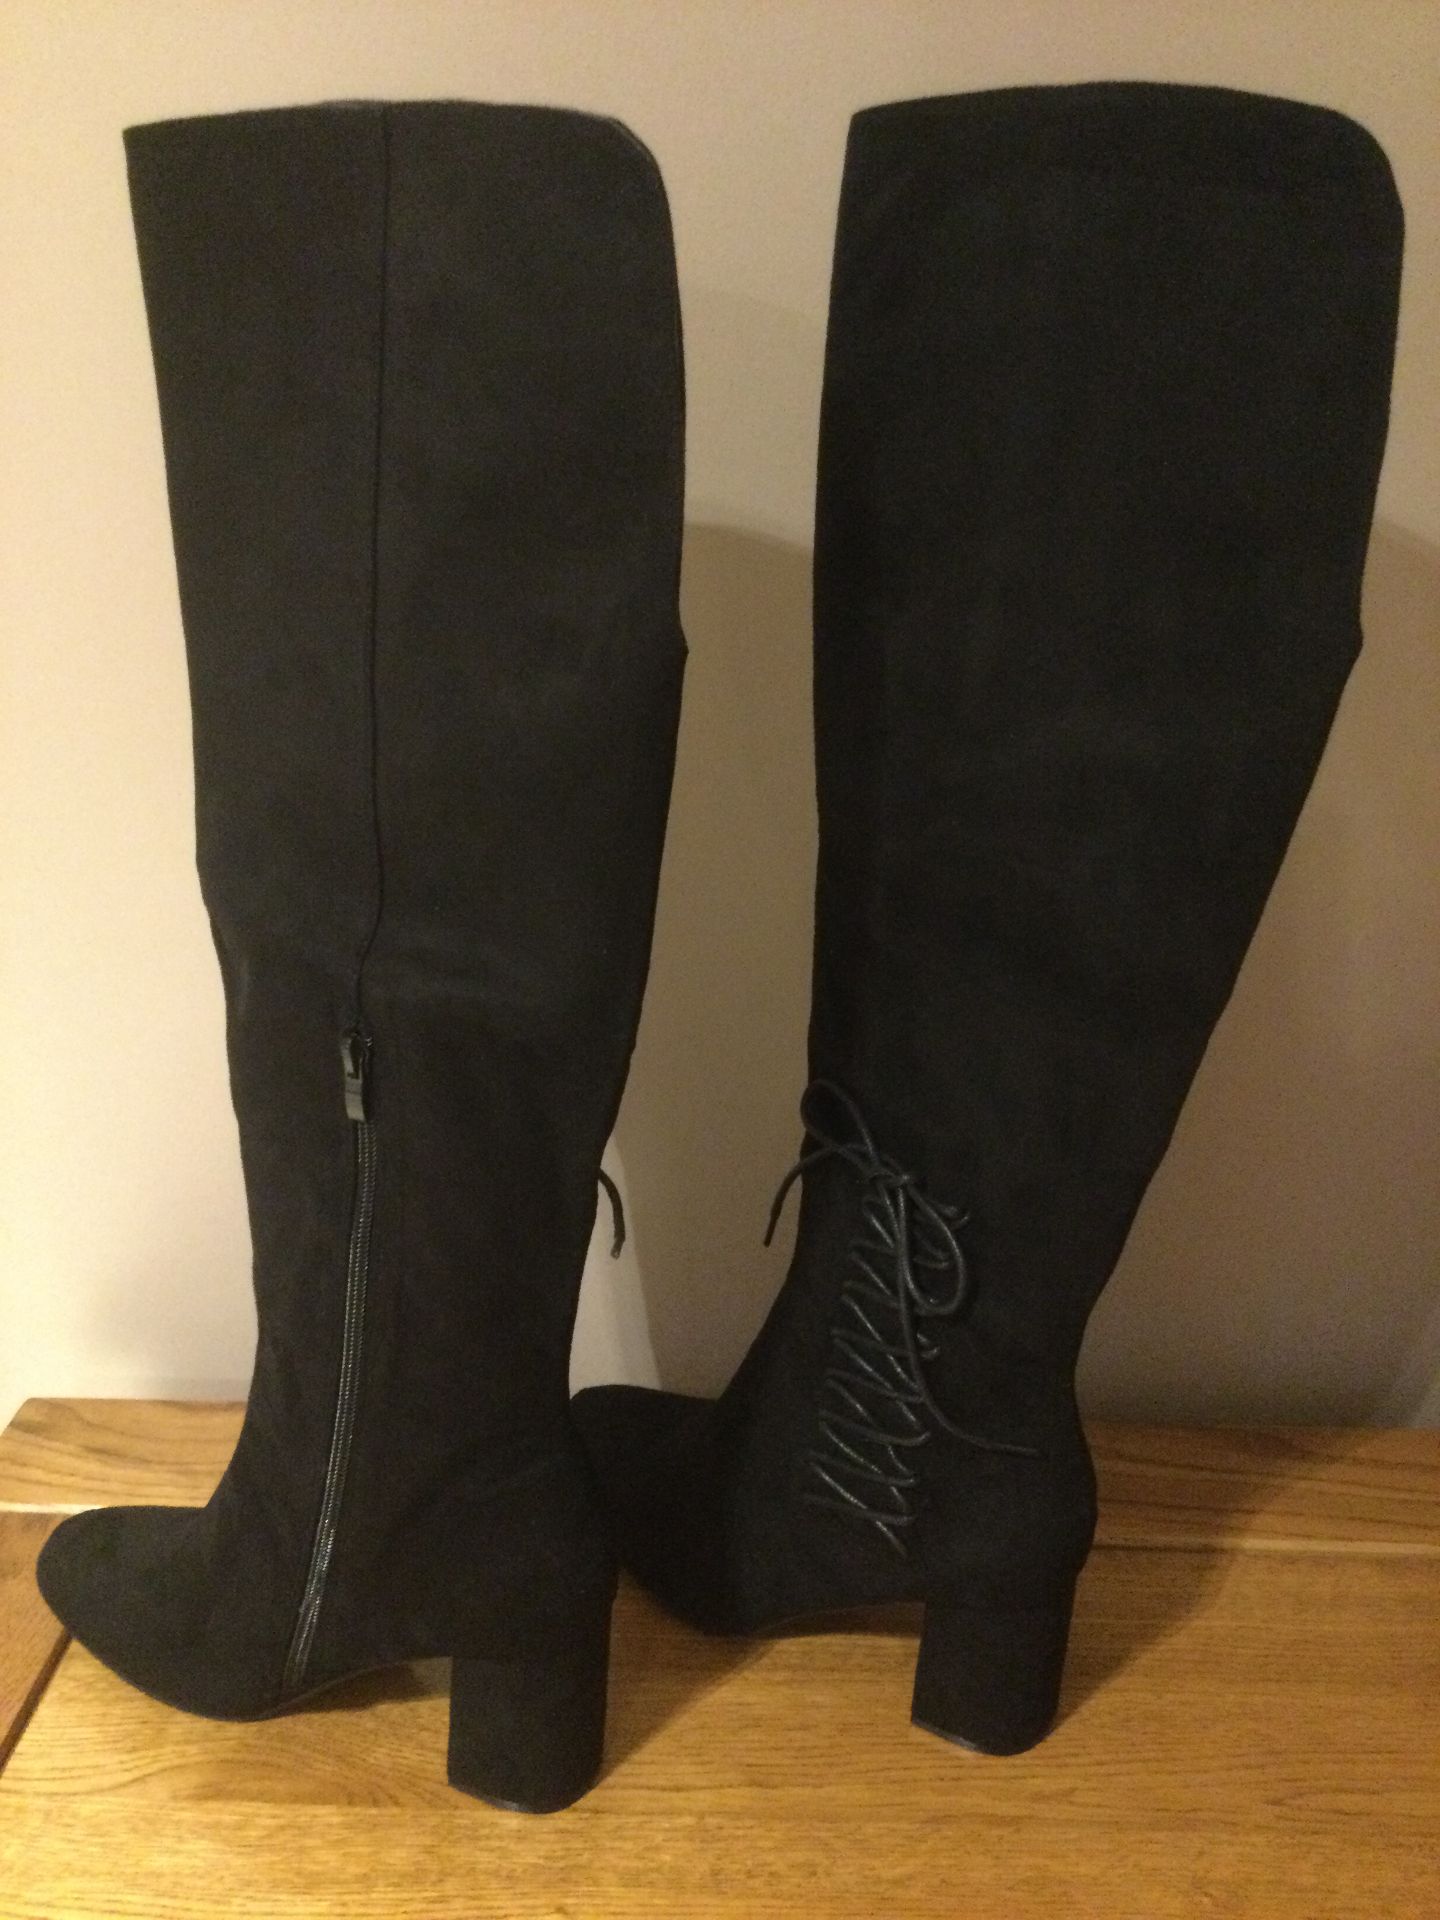 Dolcis “Emma” Long Boots, Block Heel, Size 5, Black - New RRP £55.00 - Image 2 of 7